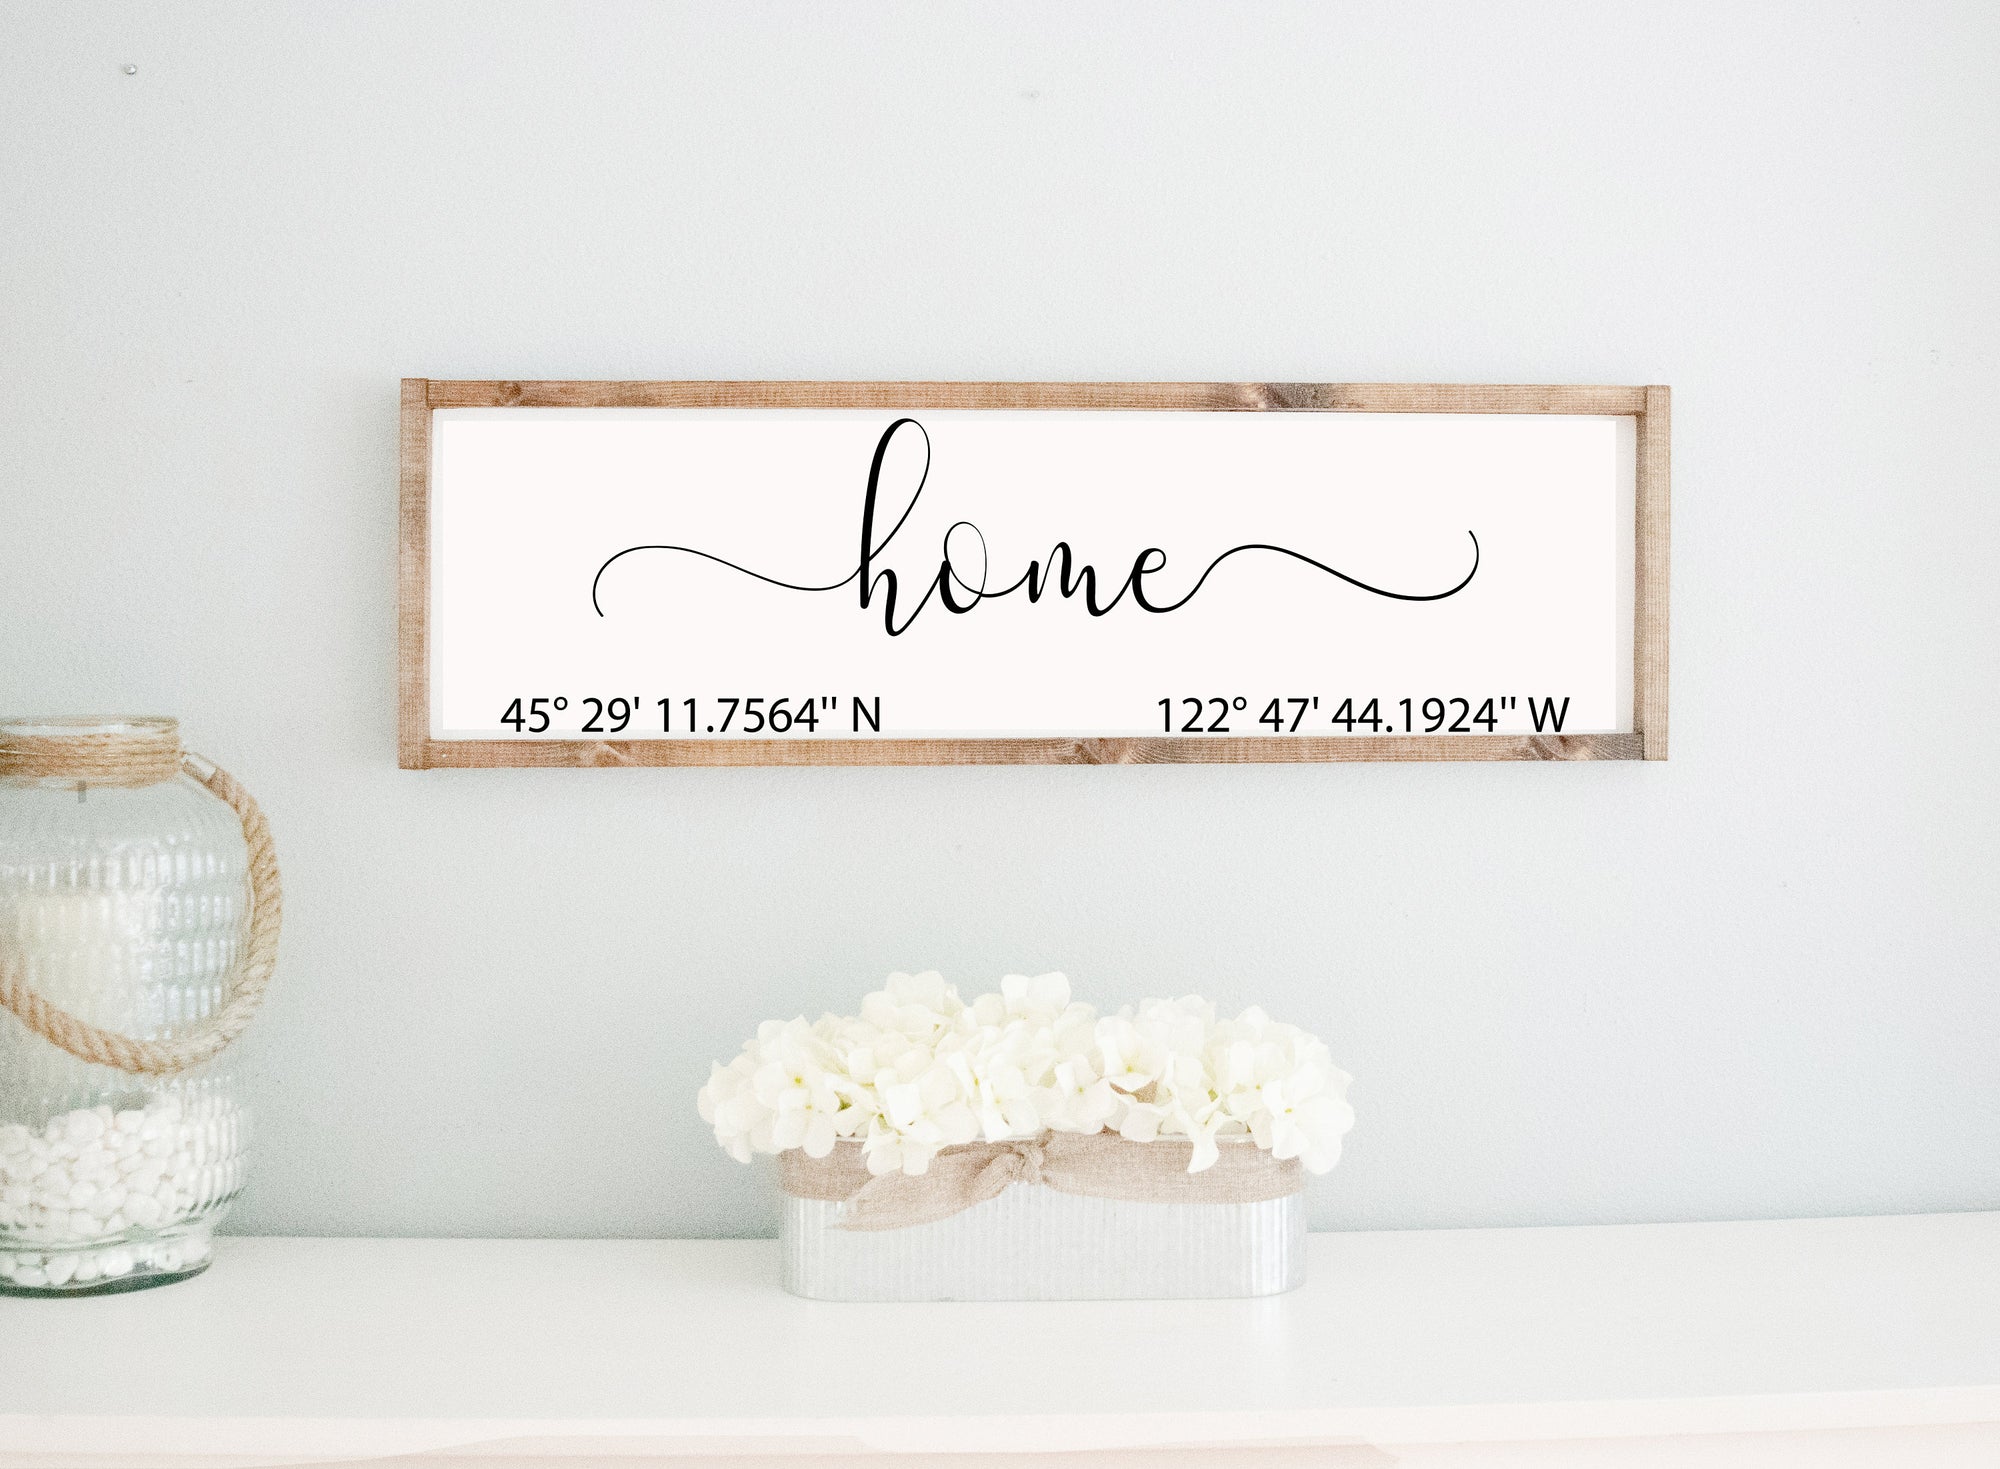 Wood Framed Longitude Latitude Sign - GPS Coordinates Wooden Wall Decor - Unique Wedding Gift Personalized Wooden Home - Anniversary Gift